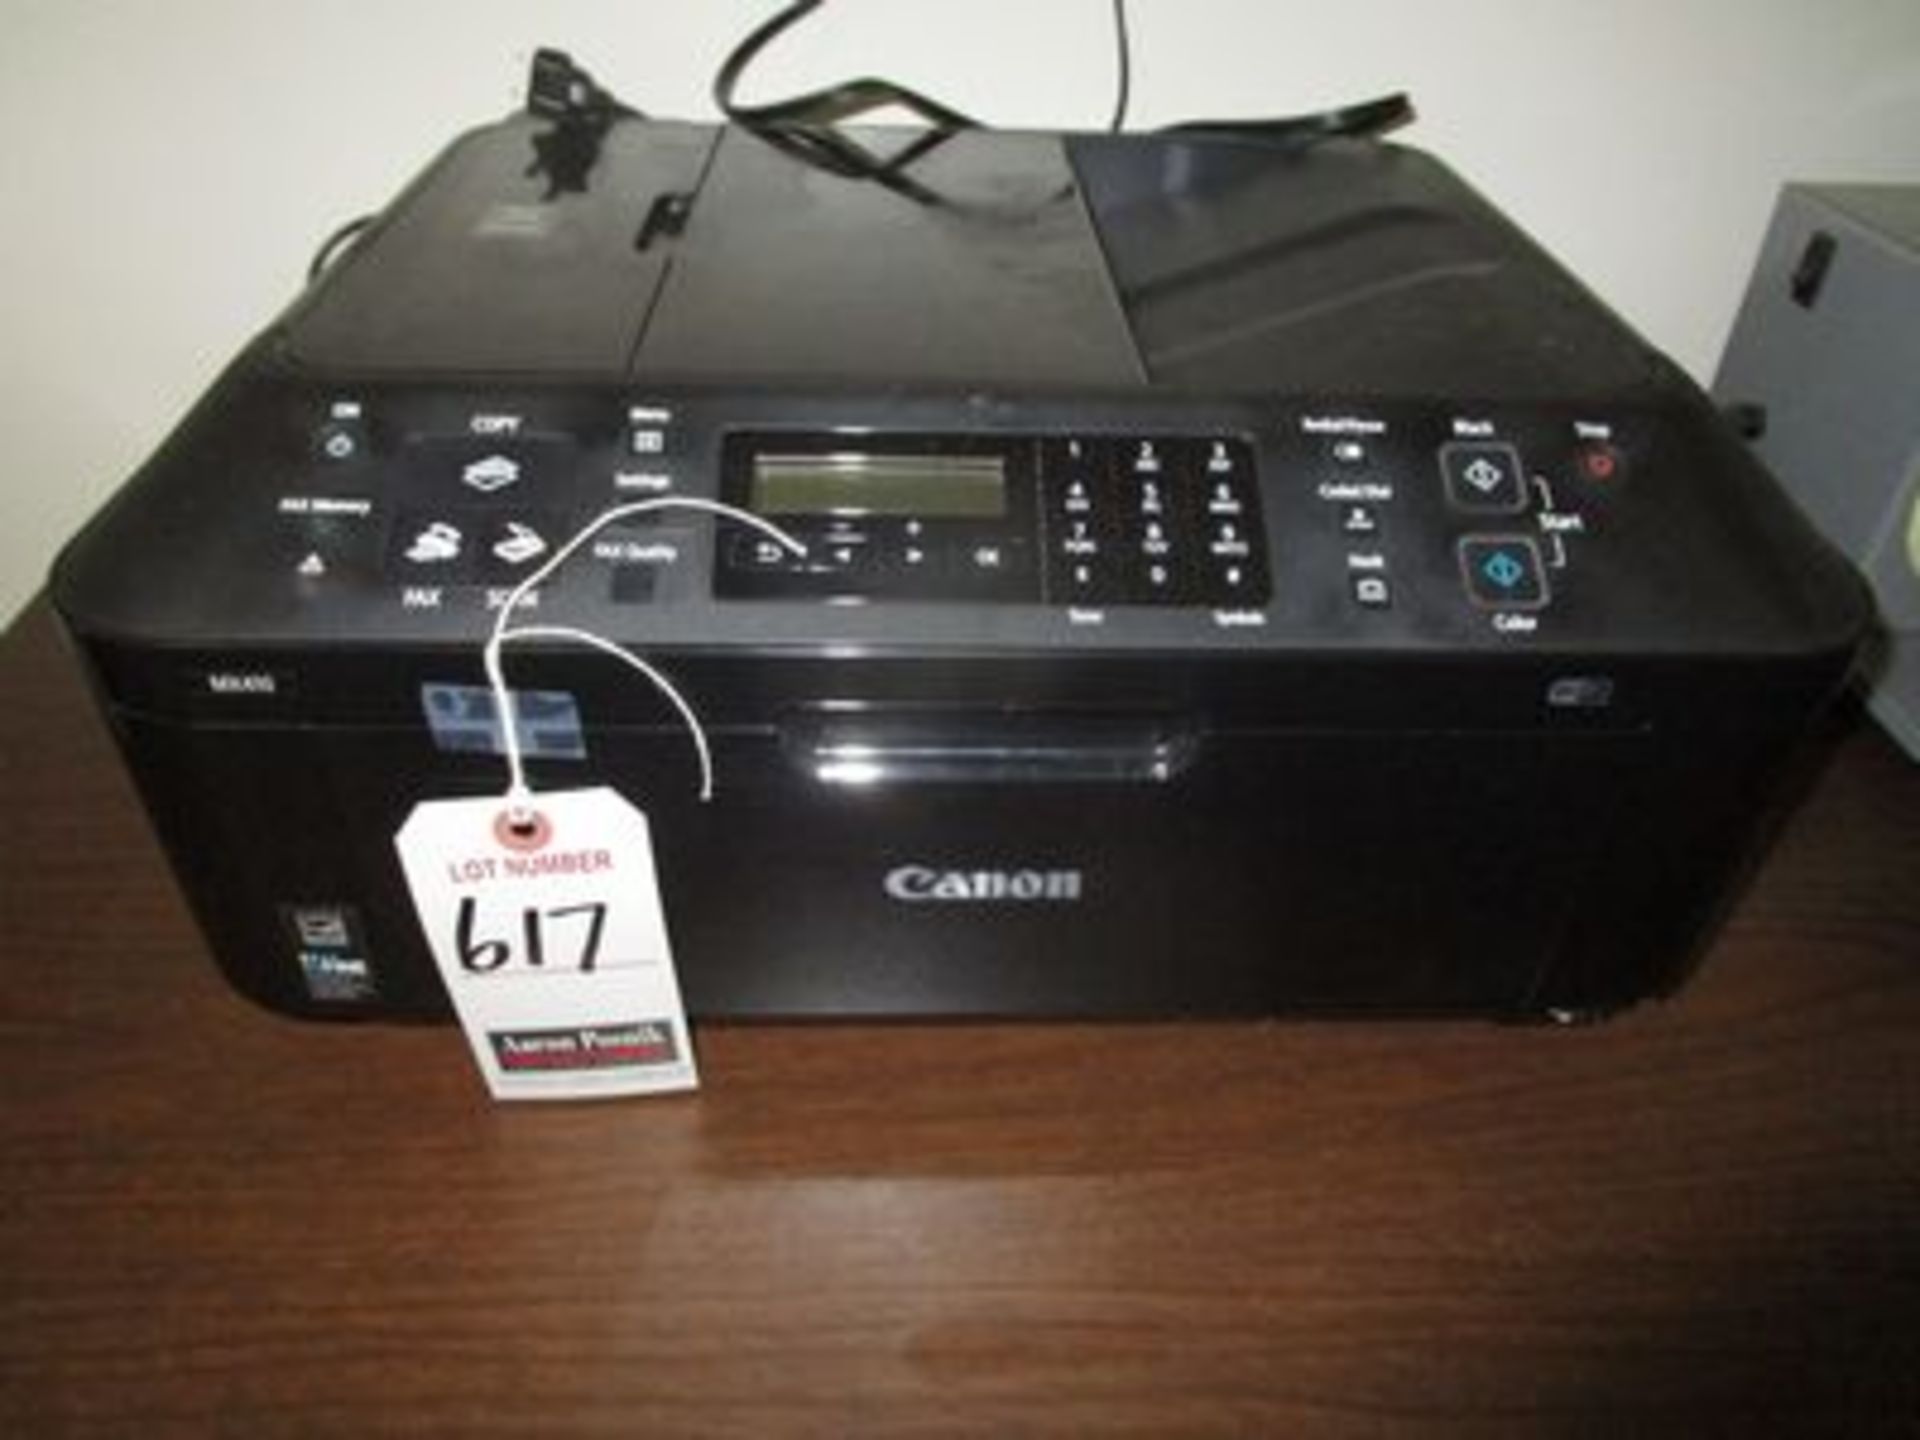 CANON MX 410 ALL-IN-ONE